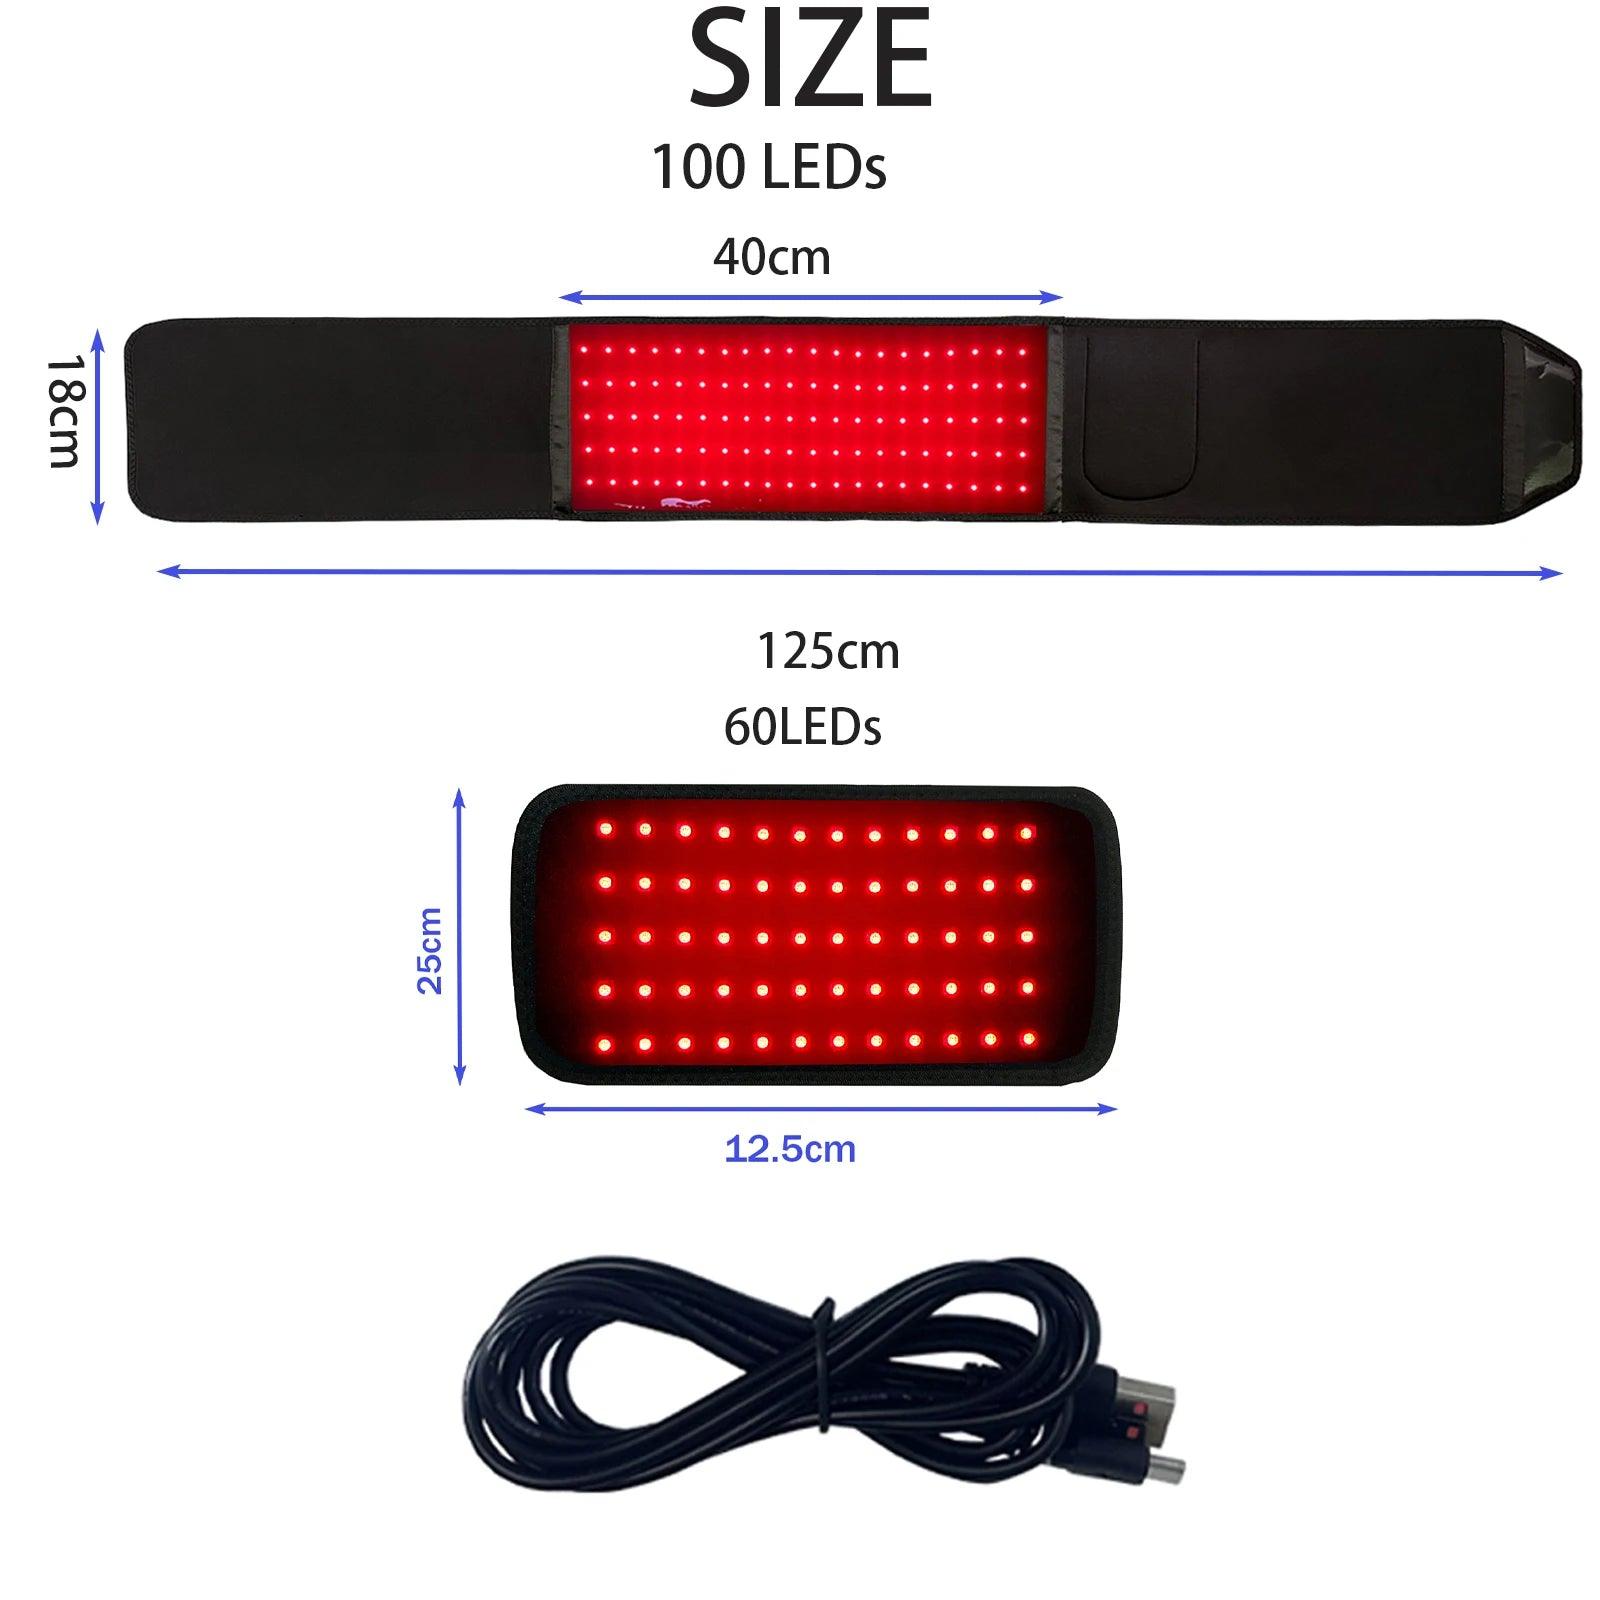 LED Red Light Therapy Belt for Pain Relief 660nm 850nm Red Infrared Light Pad for Waist,Back,Abdomen,Knees,Wrists Joints Muscle - Ammpoure Wellbeing